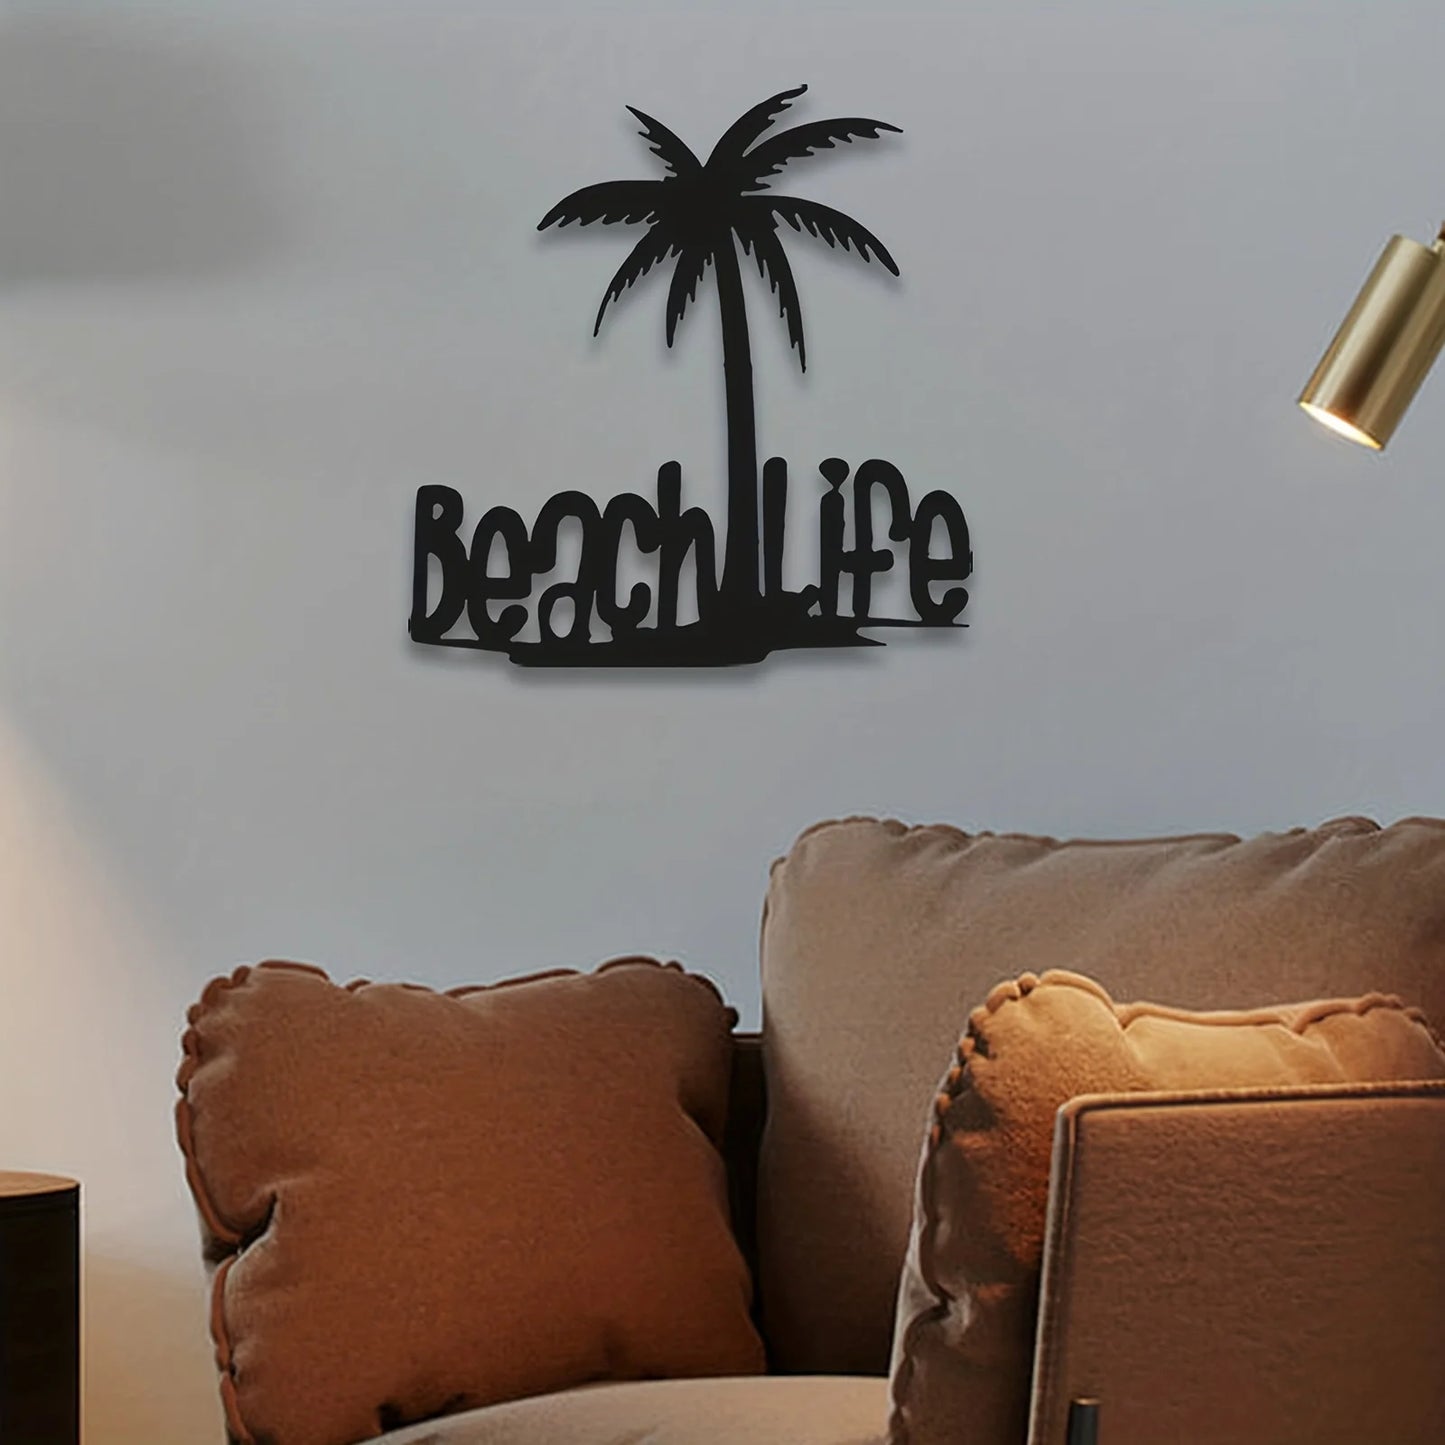 Beach Life Coconut Tree Metal Wall Art 3d Decoration For Living Room Bedroom Home Office Wall Decoration